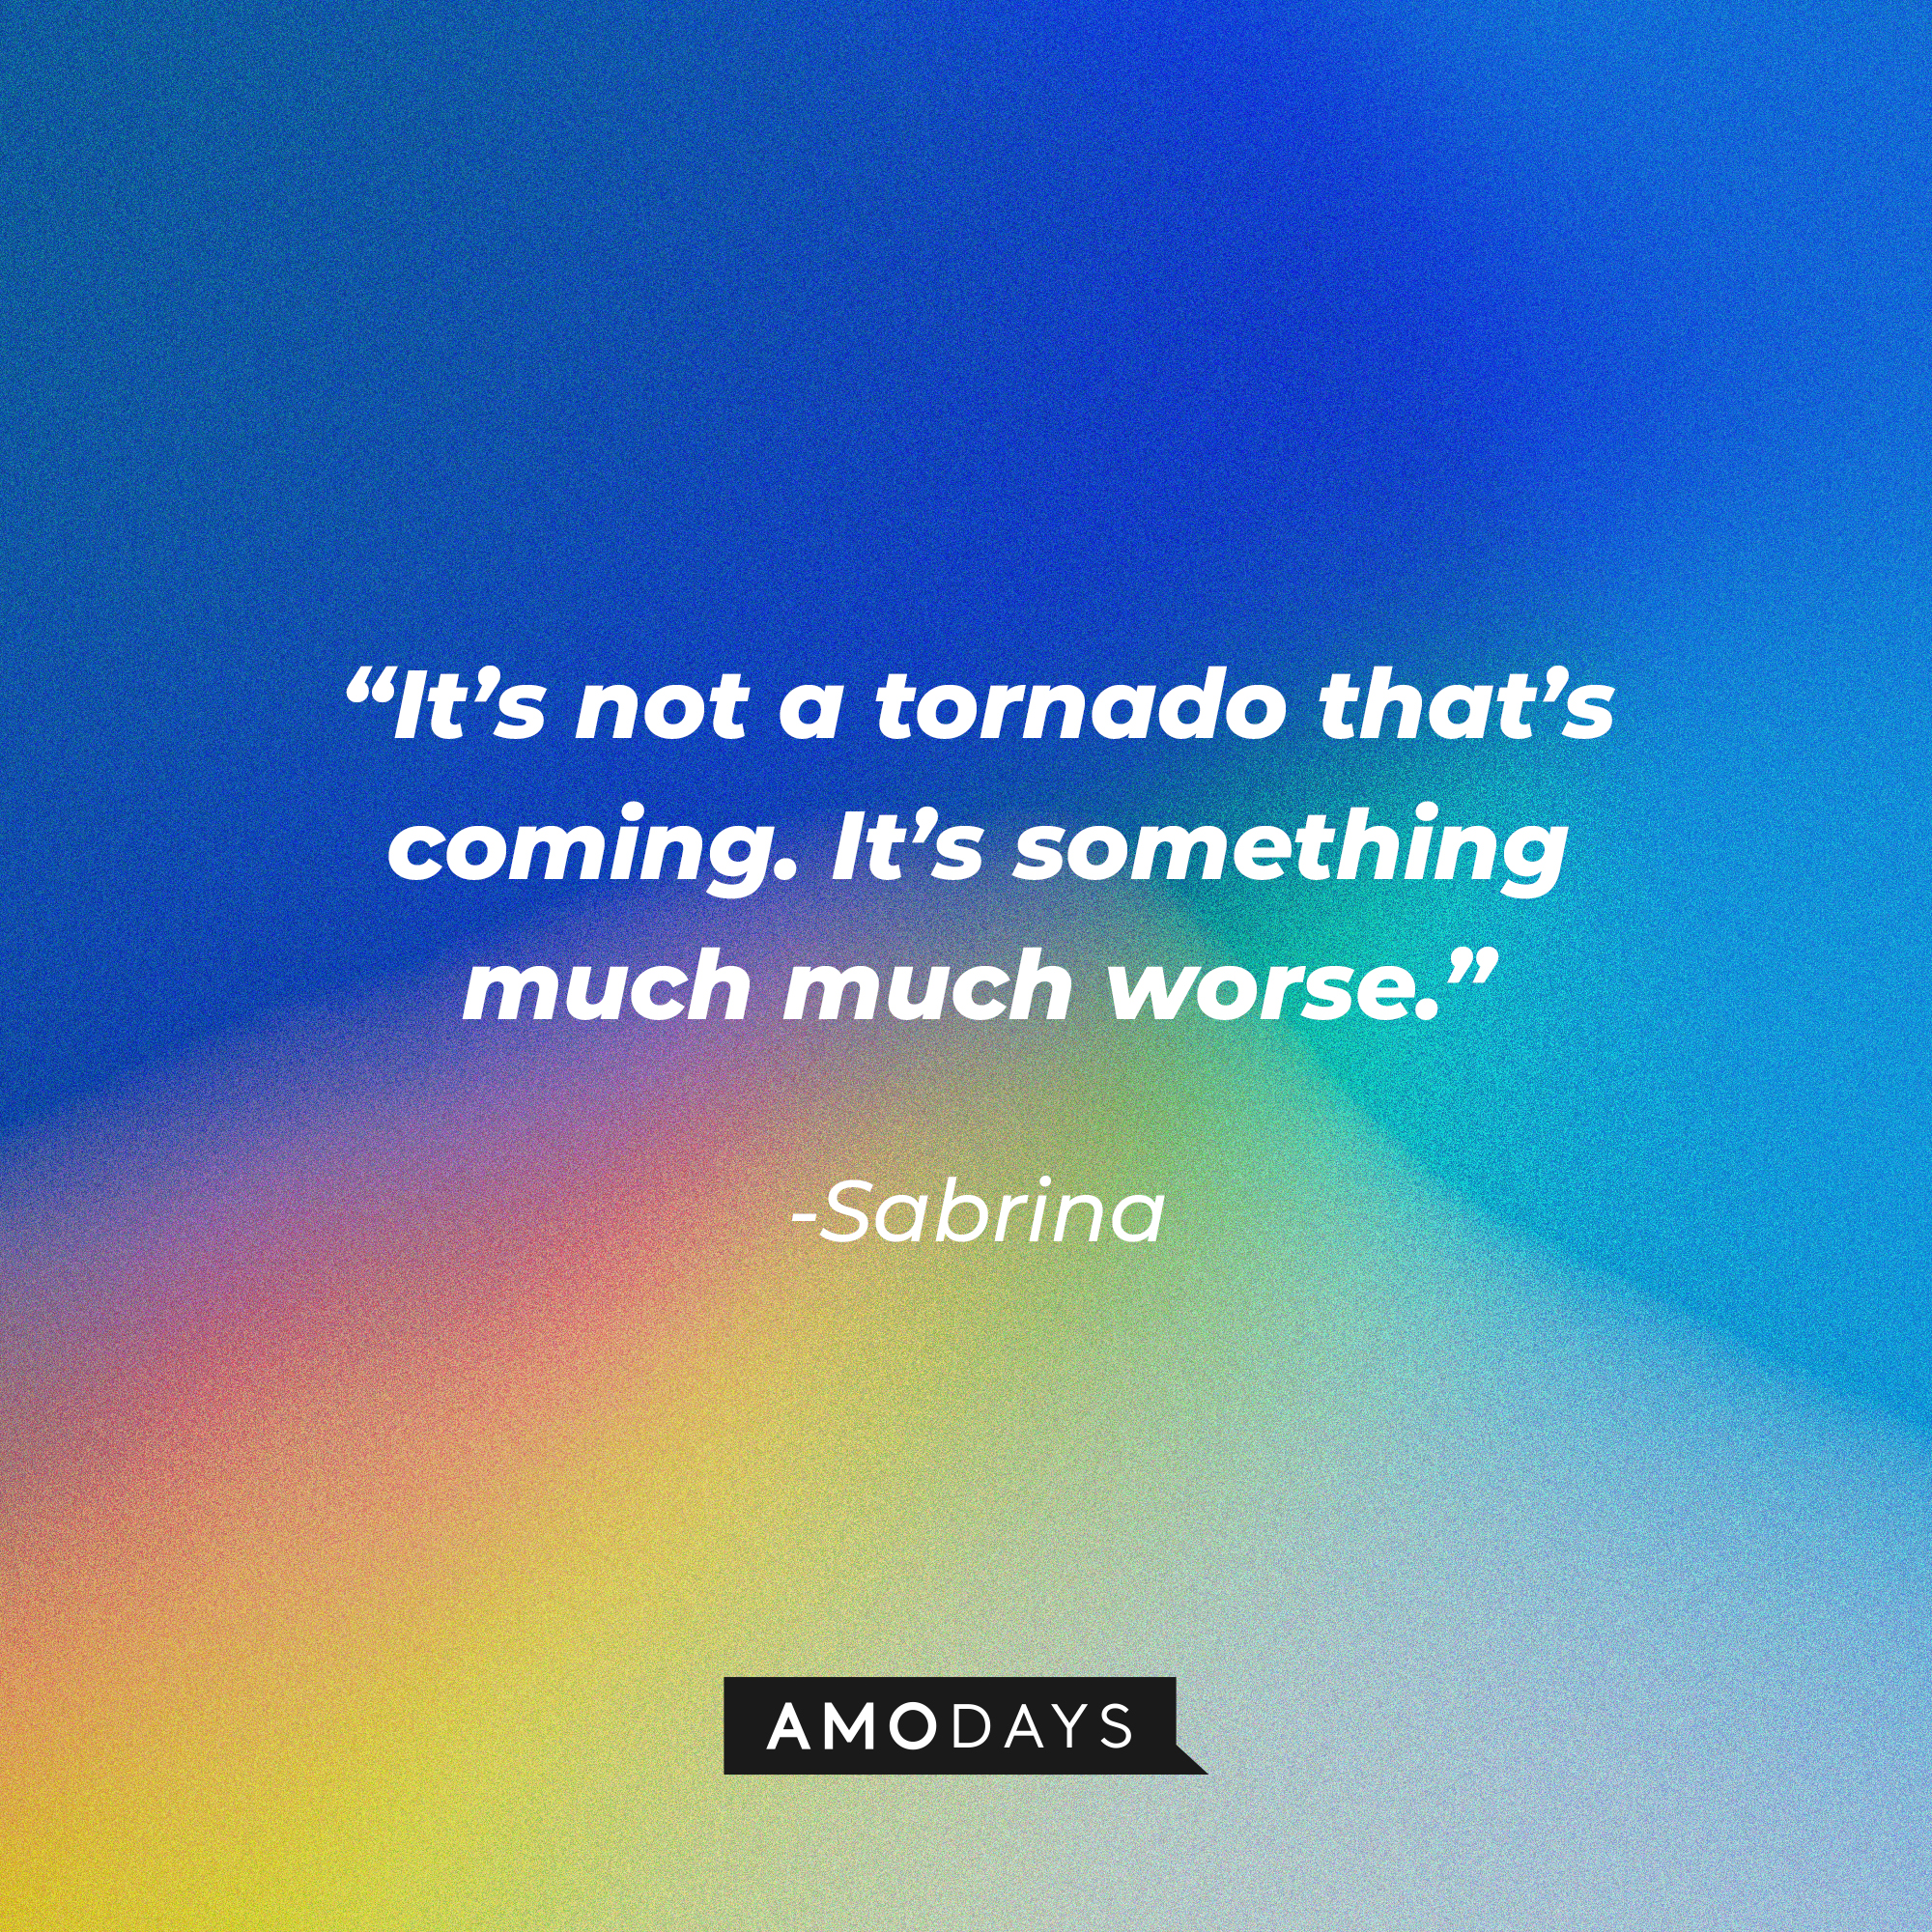 Sabrina's quote: “It’s not a tornado that’s coming. It’s something much much worse.” | Source: Amodays